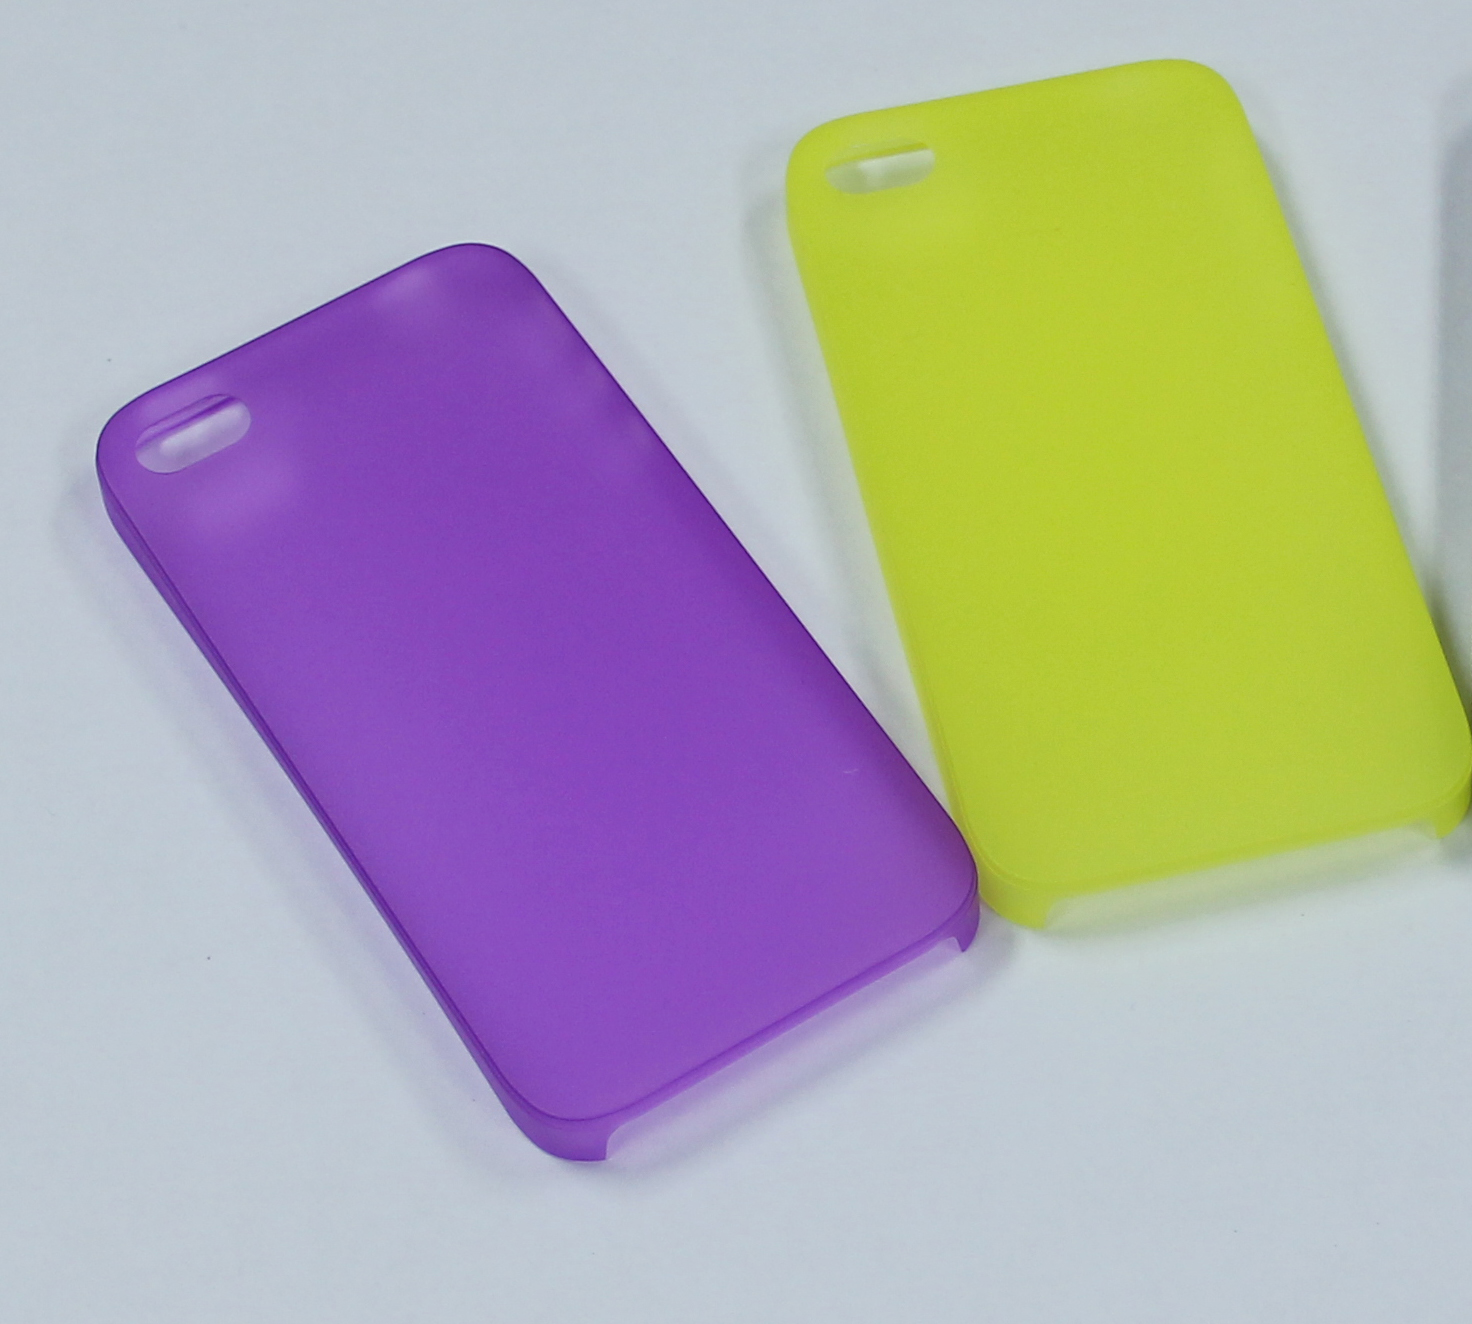 The new iphone4 silicone phone sets